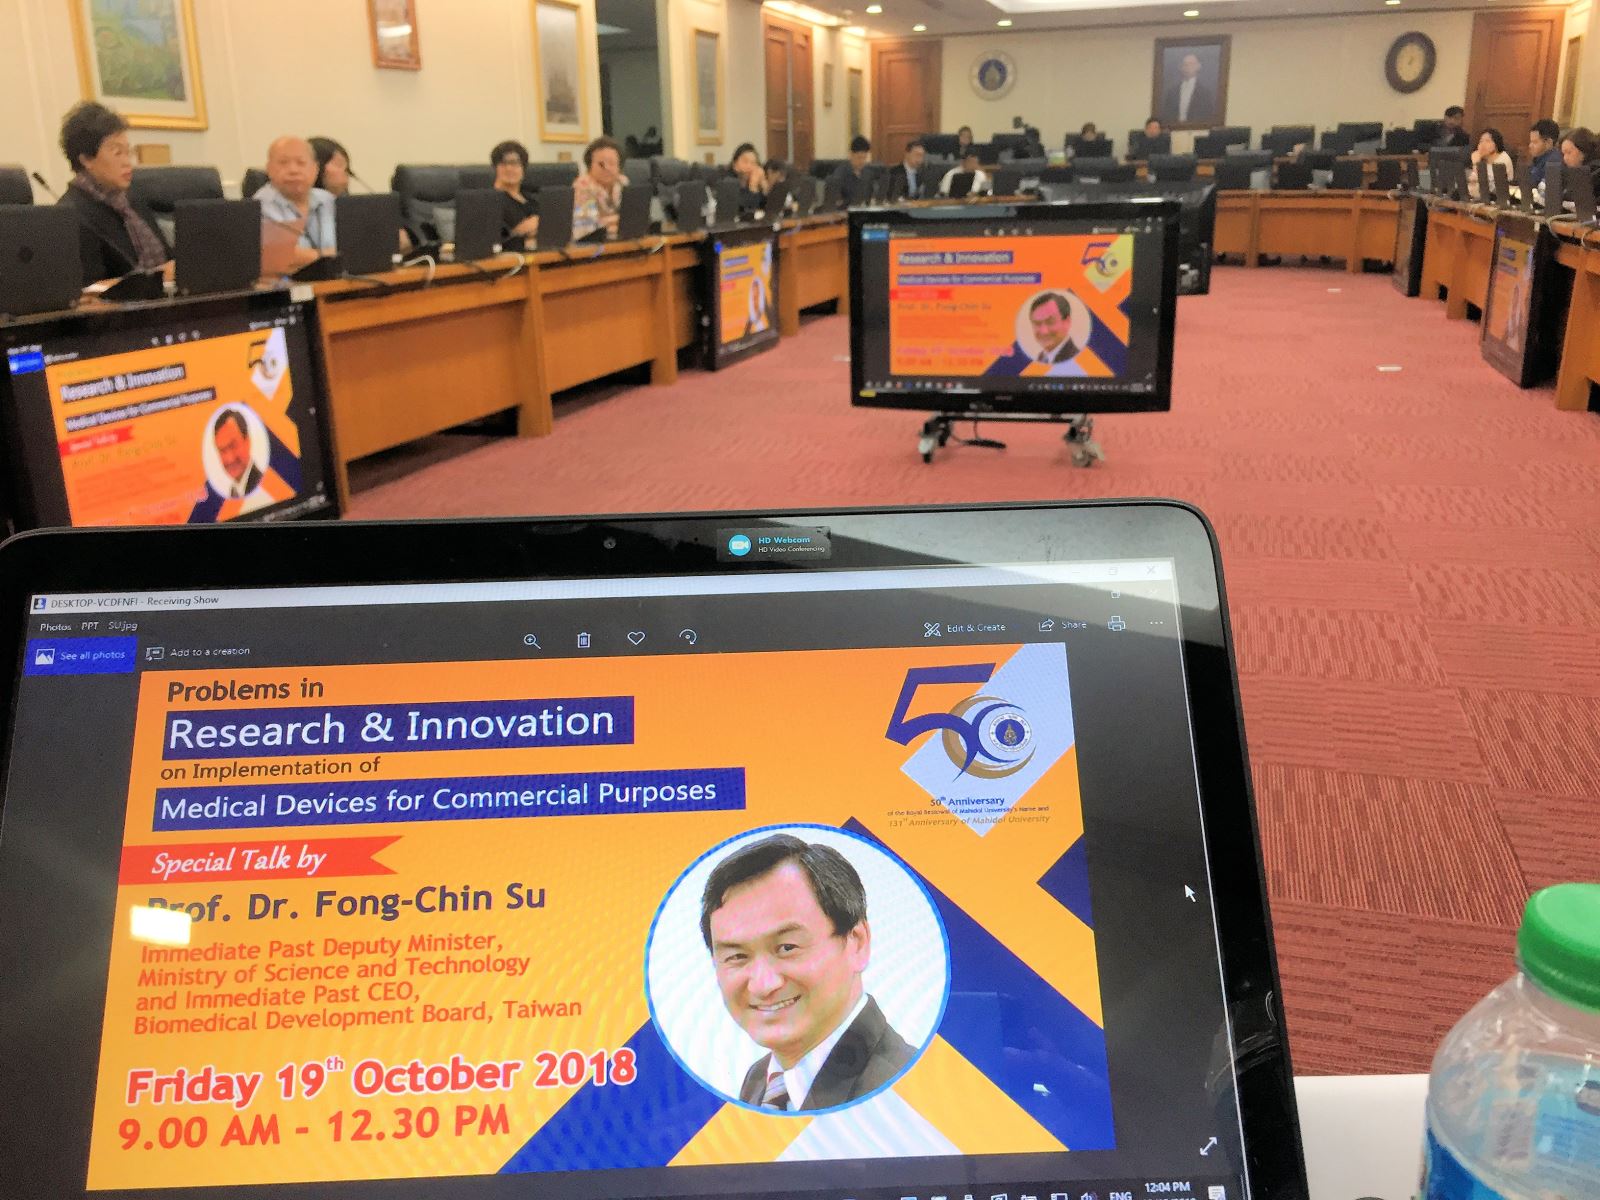 To celebrate the 50th anniversary of MU, Vice President Fong-Chin Su was invited to share the problems in research and innovation on the implementation of medical devices for commercial purposes with MU staff